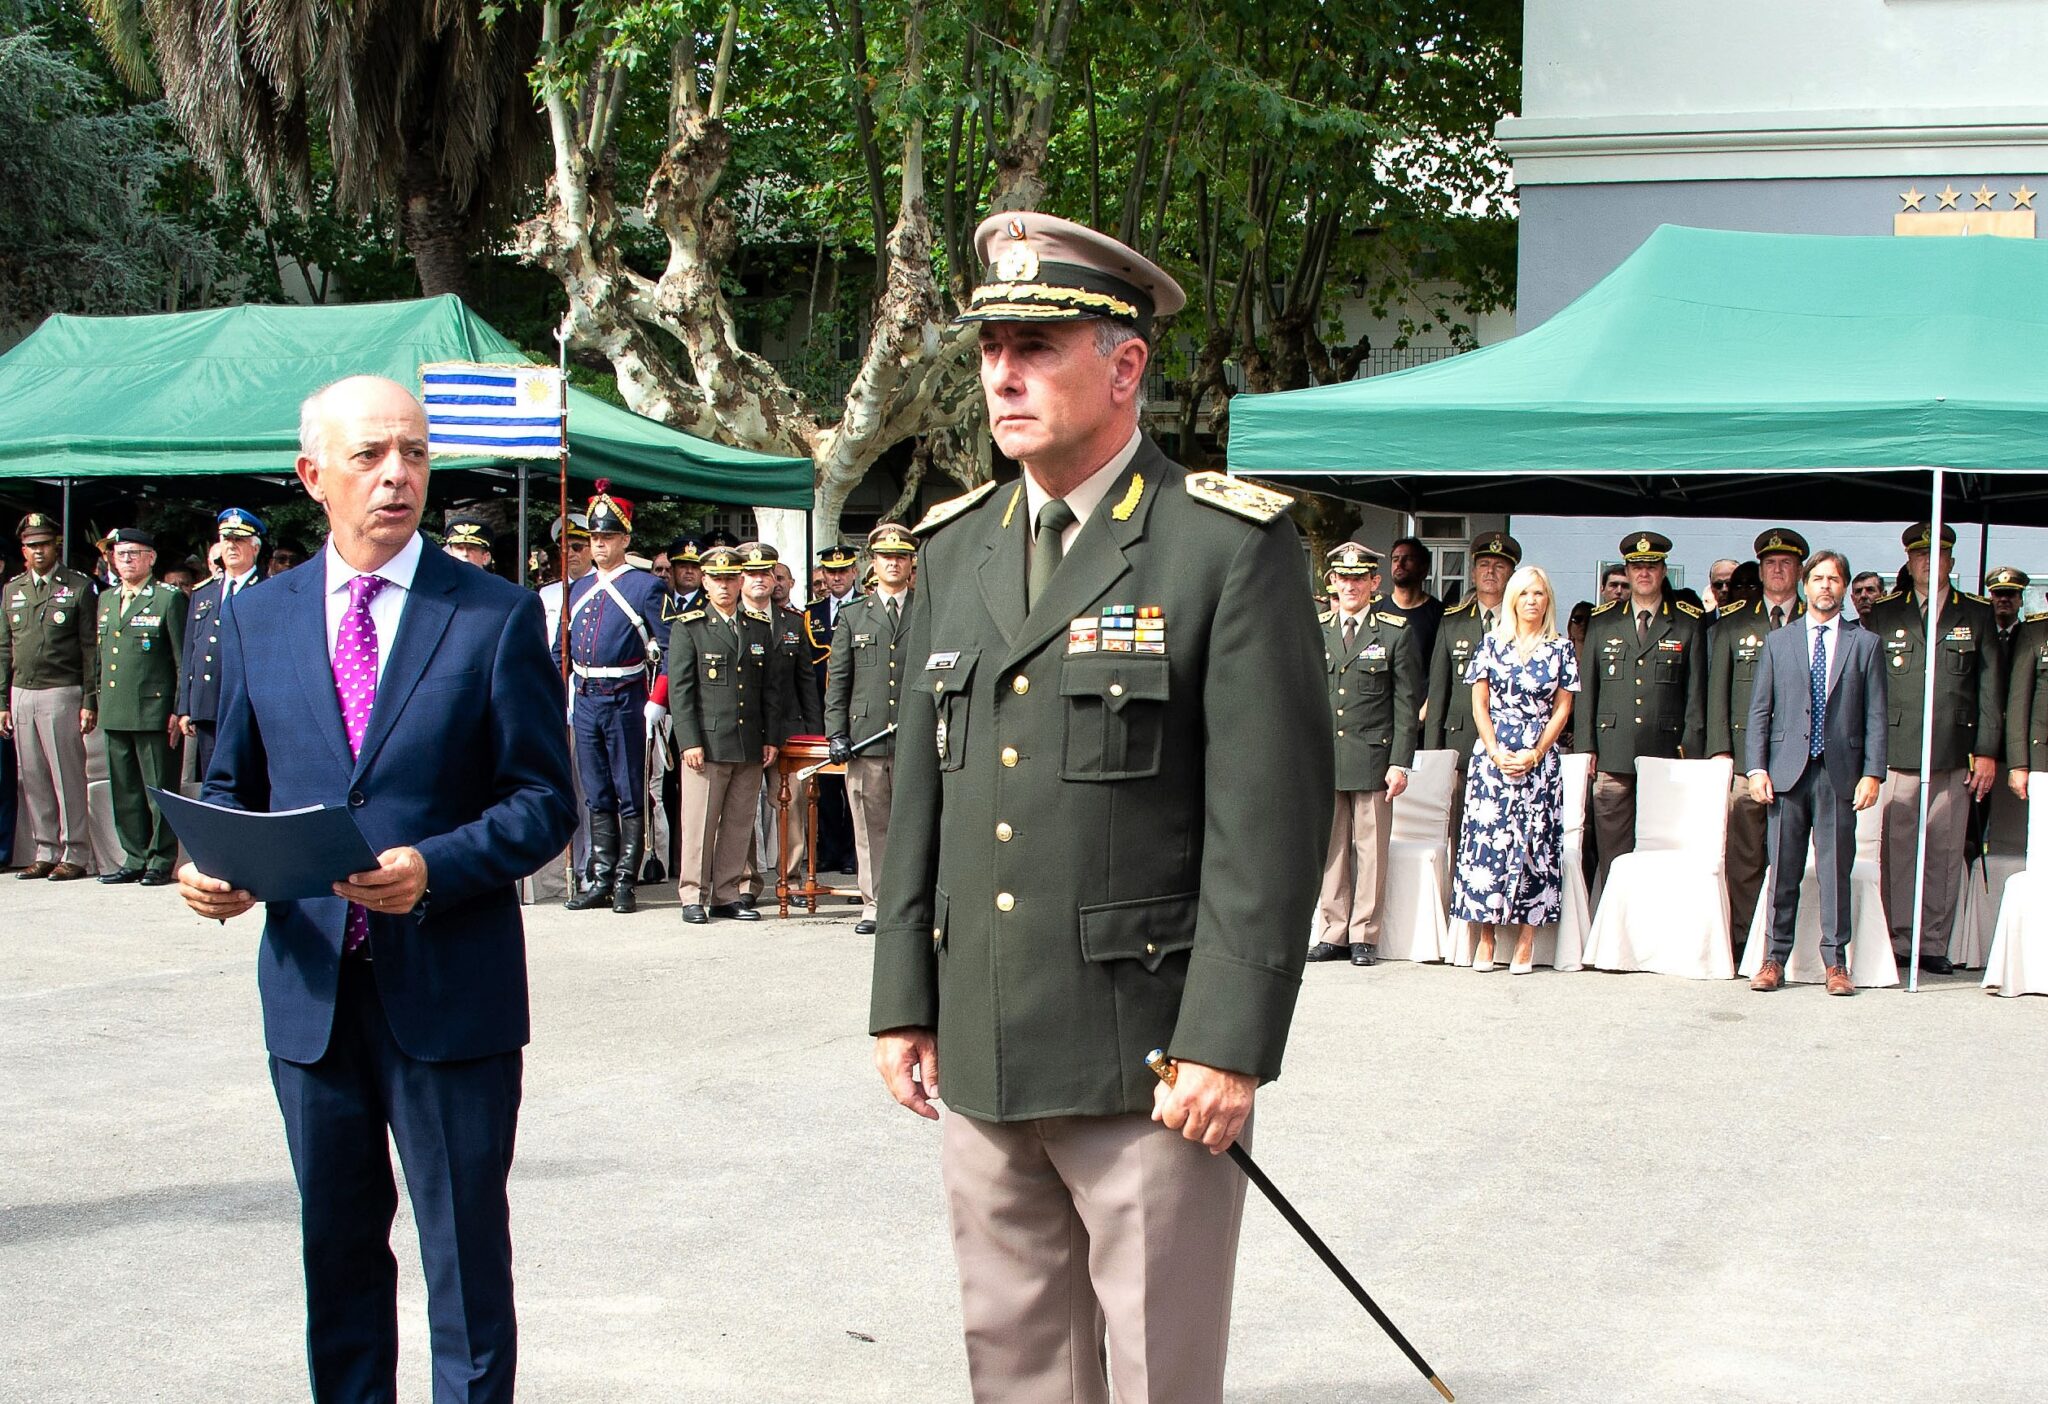 General Mario Stevenazzi took over as the new Commander in Chief